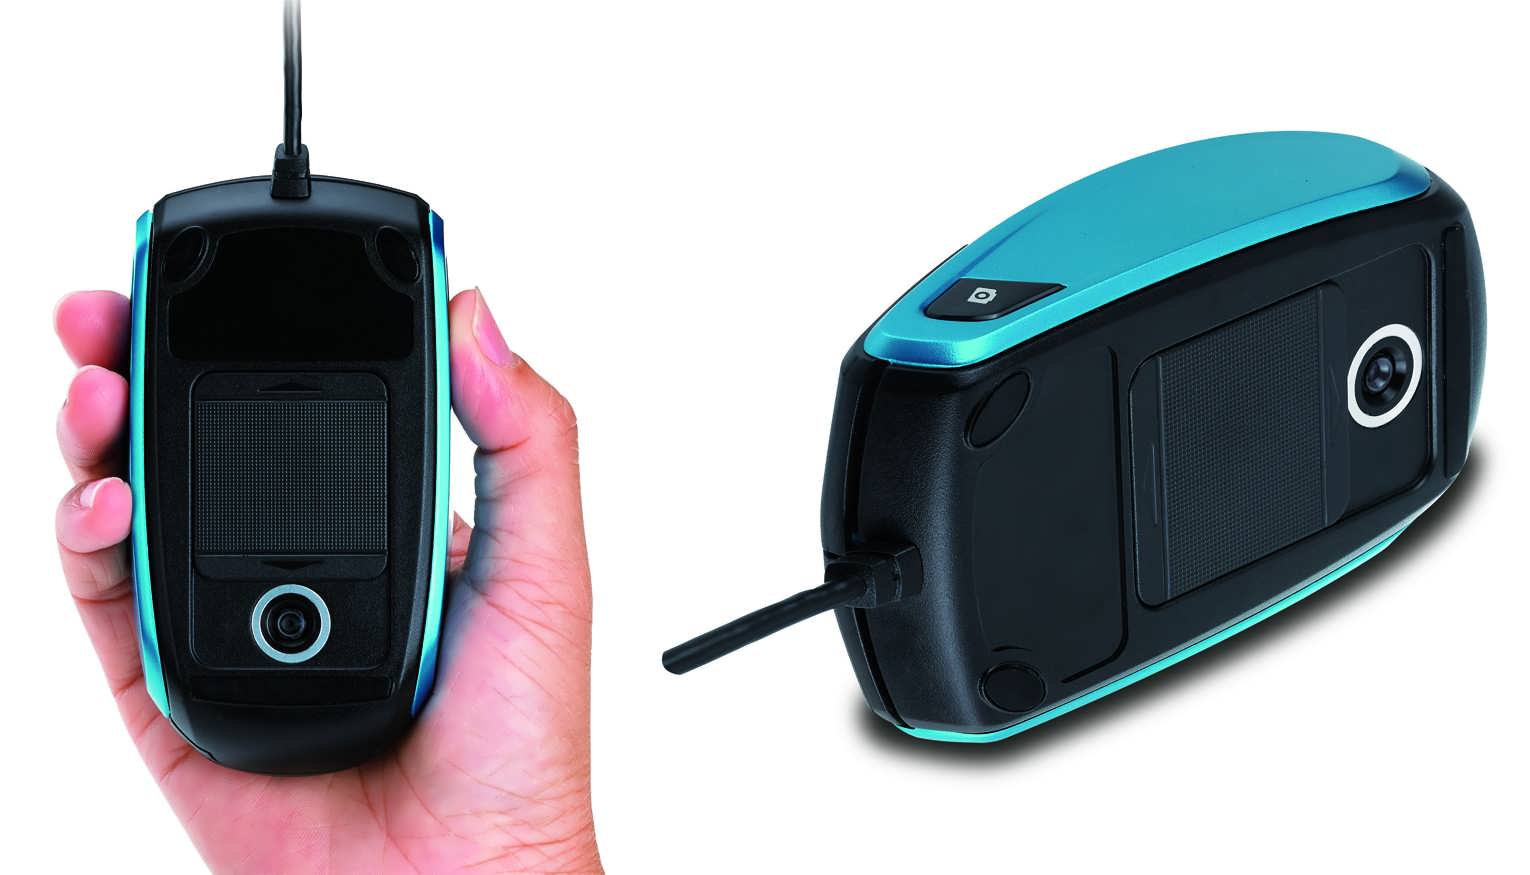 Genius All-in-One Mouse & Camera 2 Megapixel 1,200 Dpi